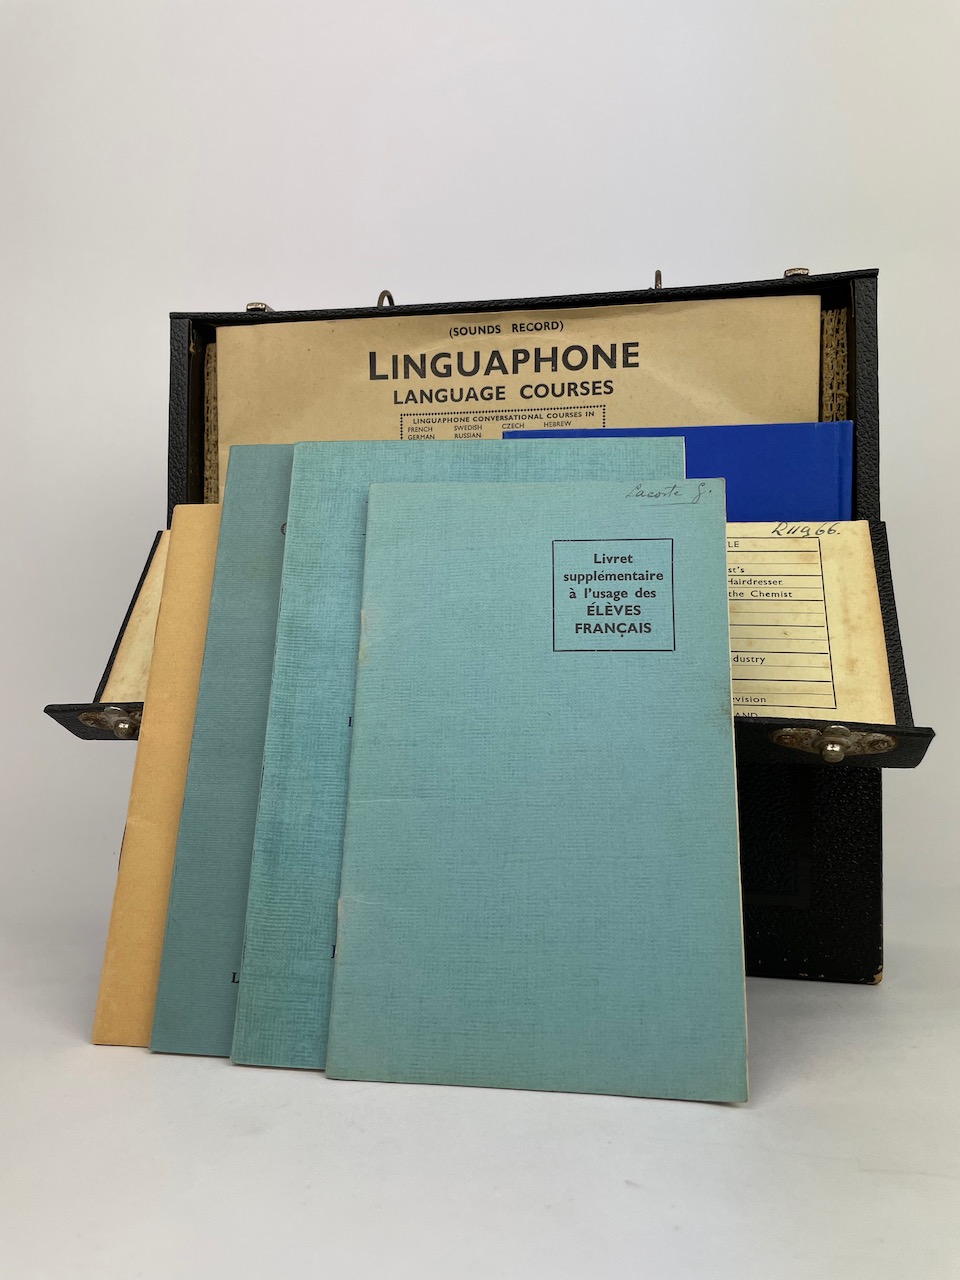 Linguaphone Conversational Course English - Complete set - 16 records and 5 booklets in original box 6